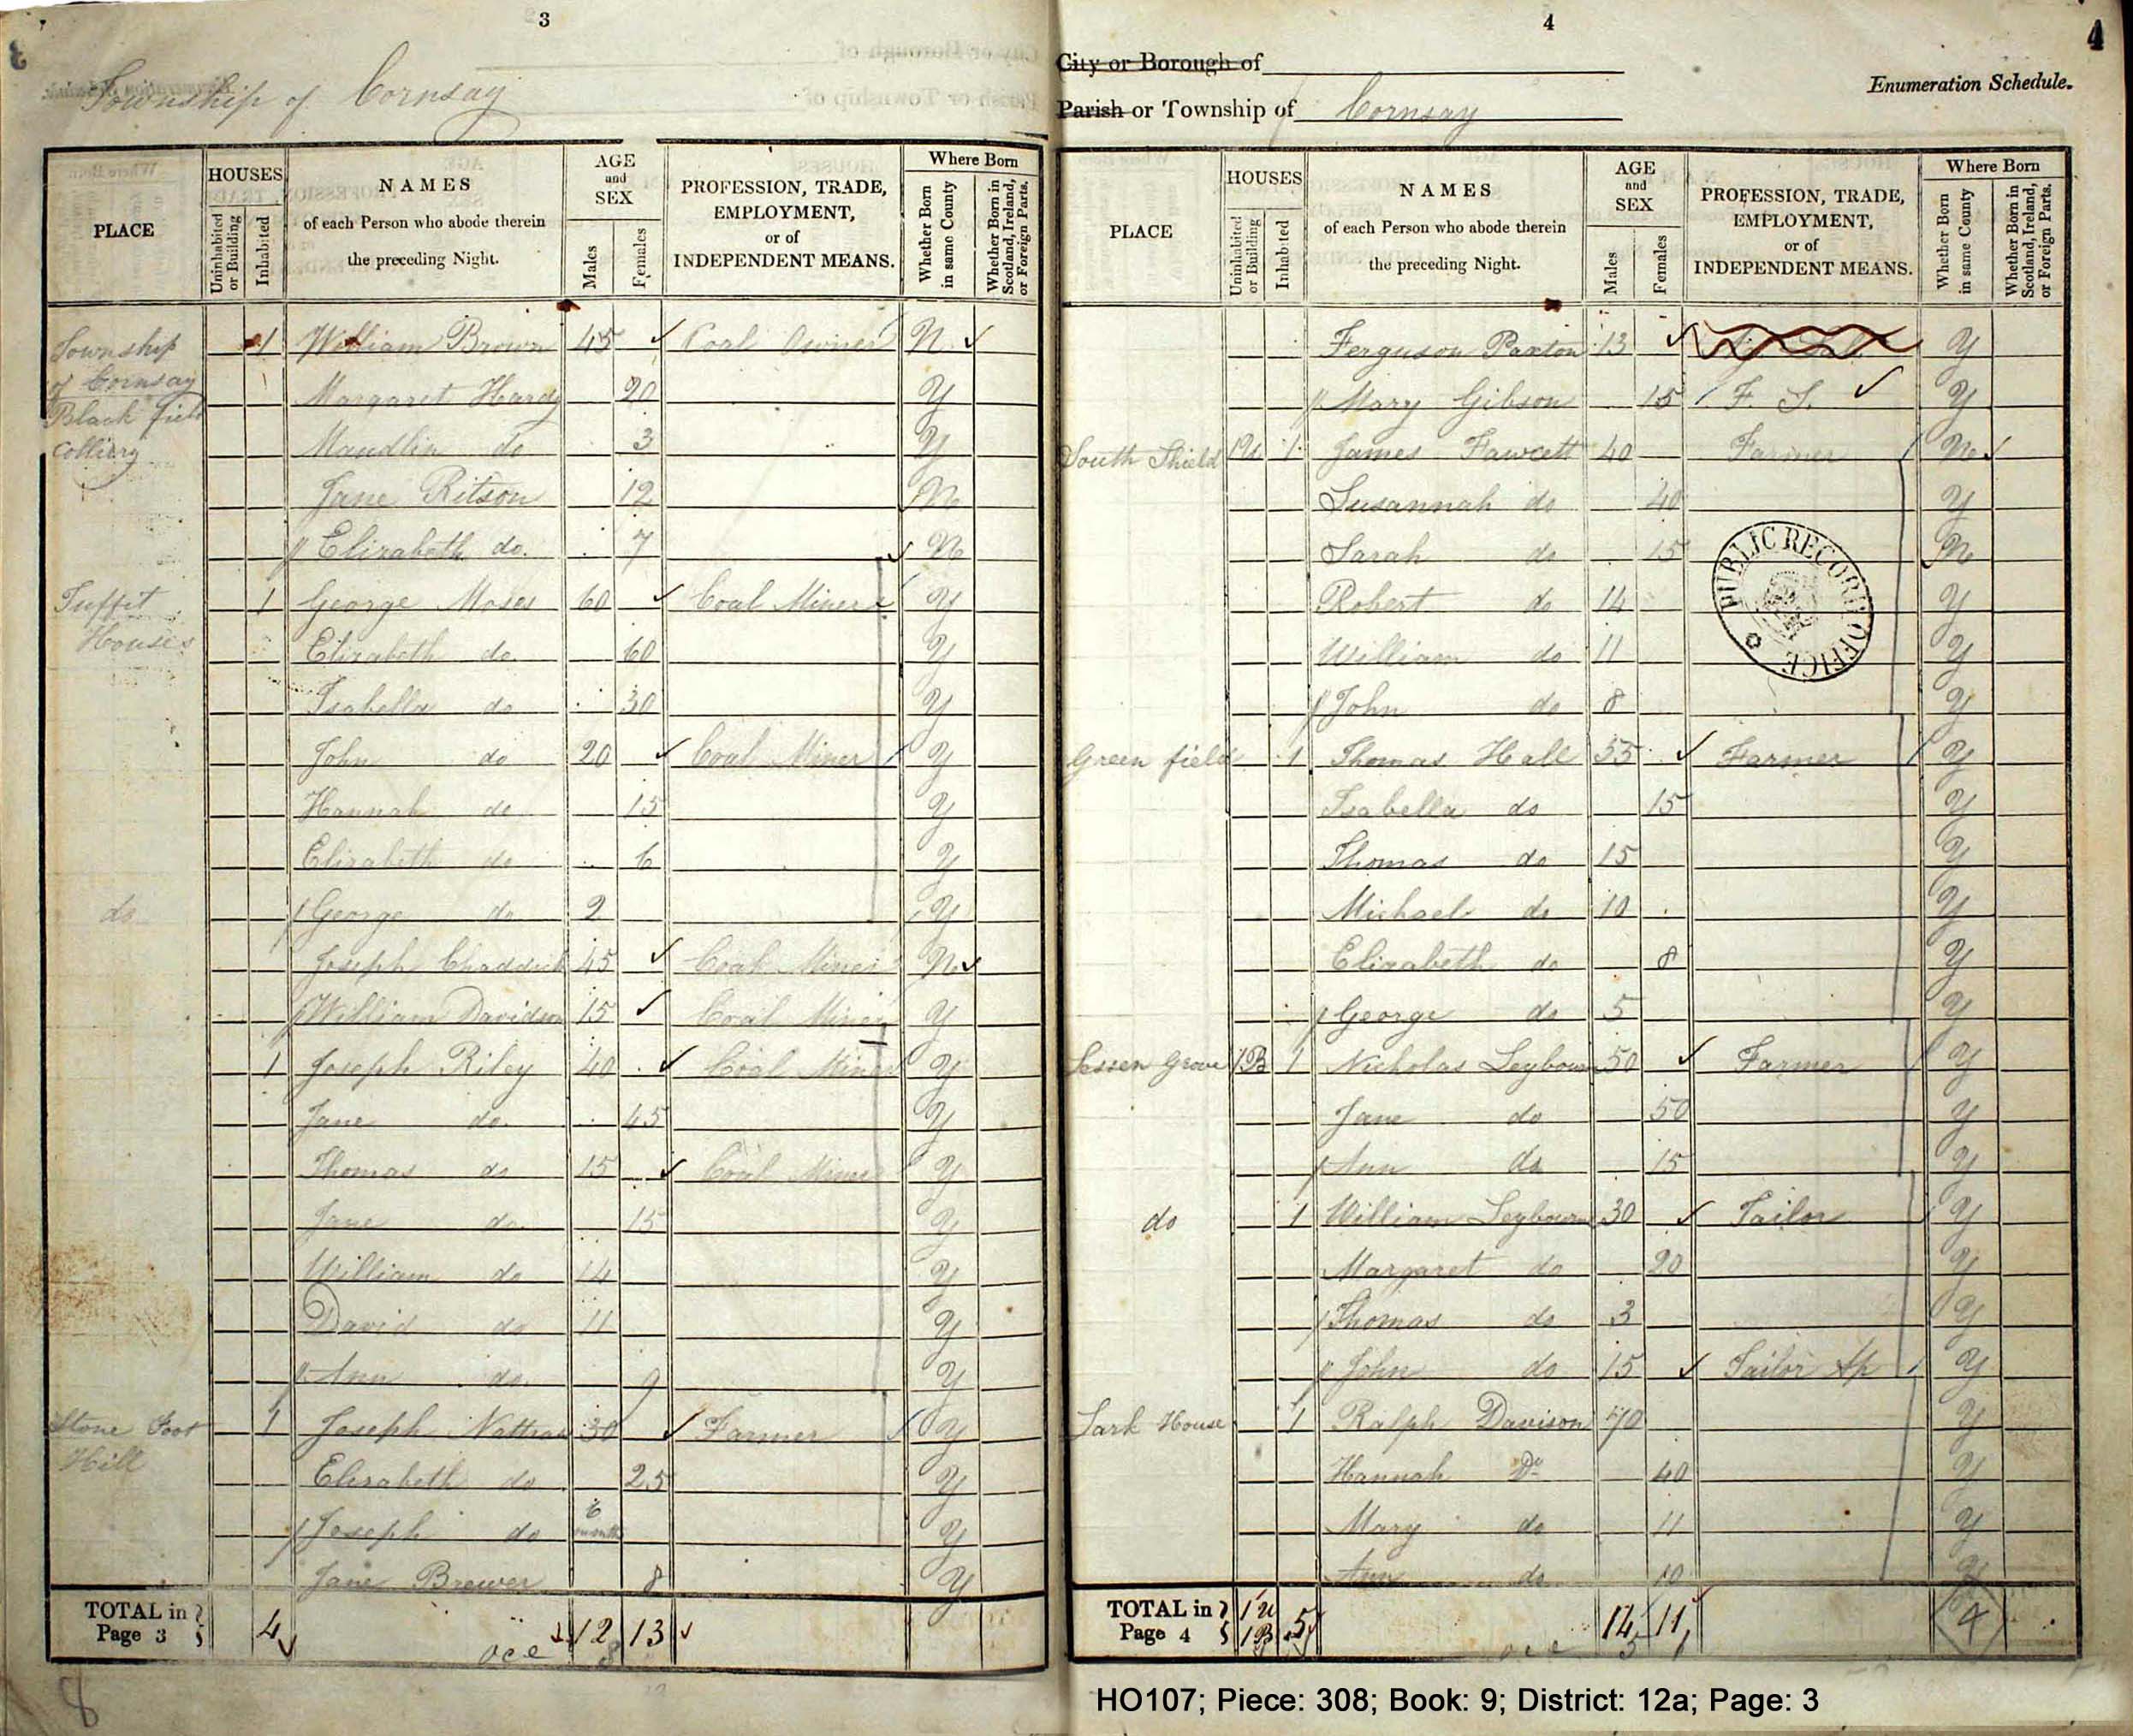 1841, HO107, Piece 308, Book 9, District 12a Page 3